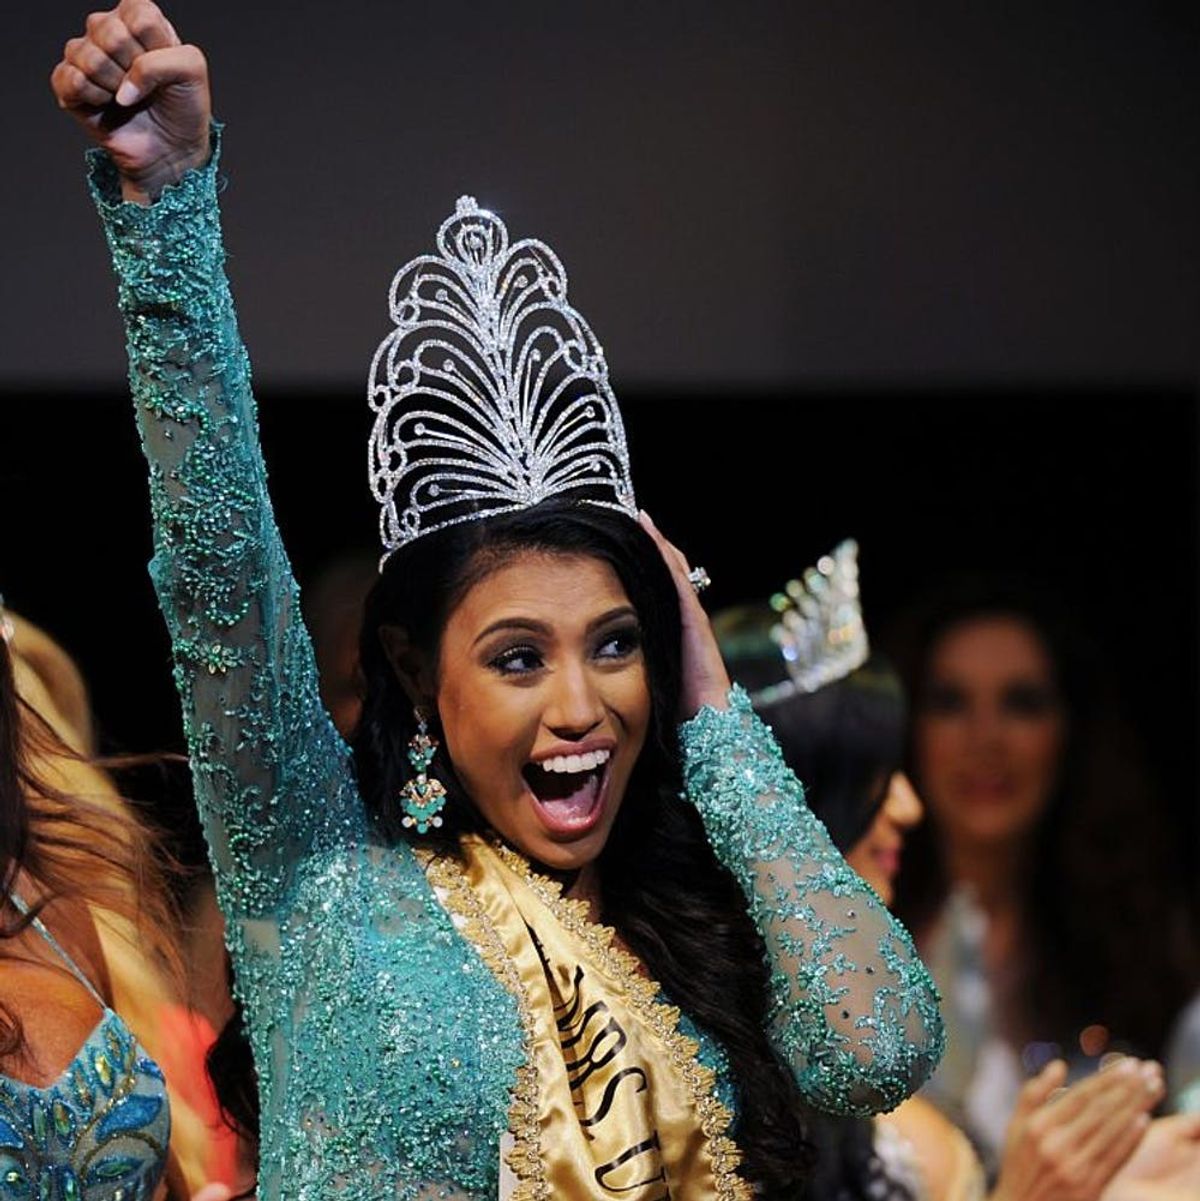 This Pageant Queen Uses Her Platform to Fight for Indigenous Rights